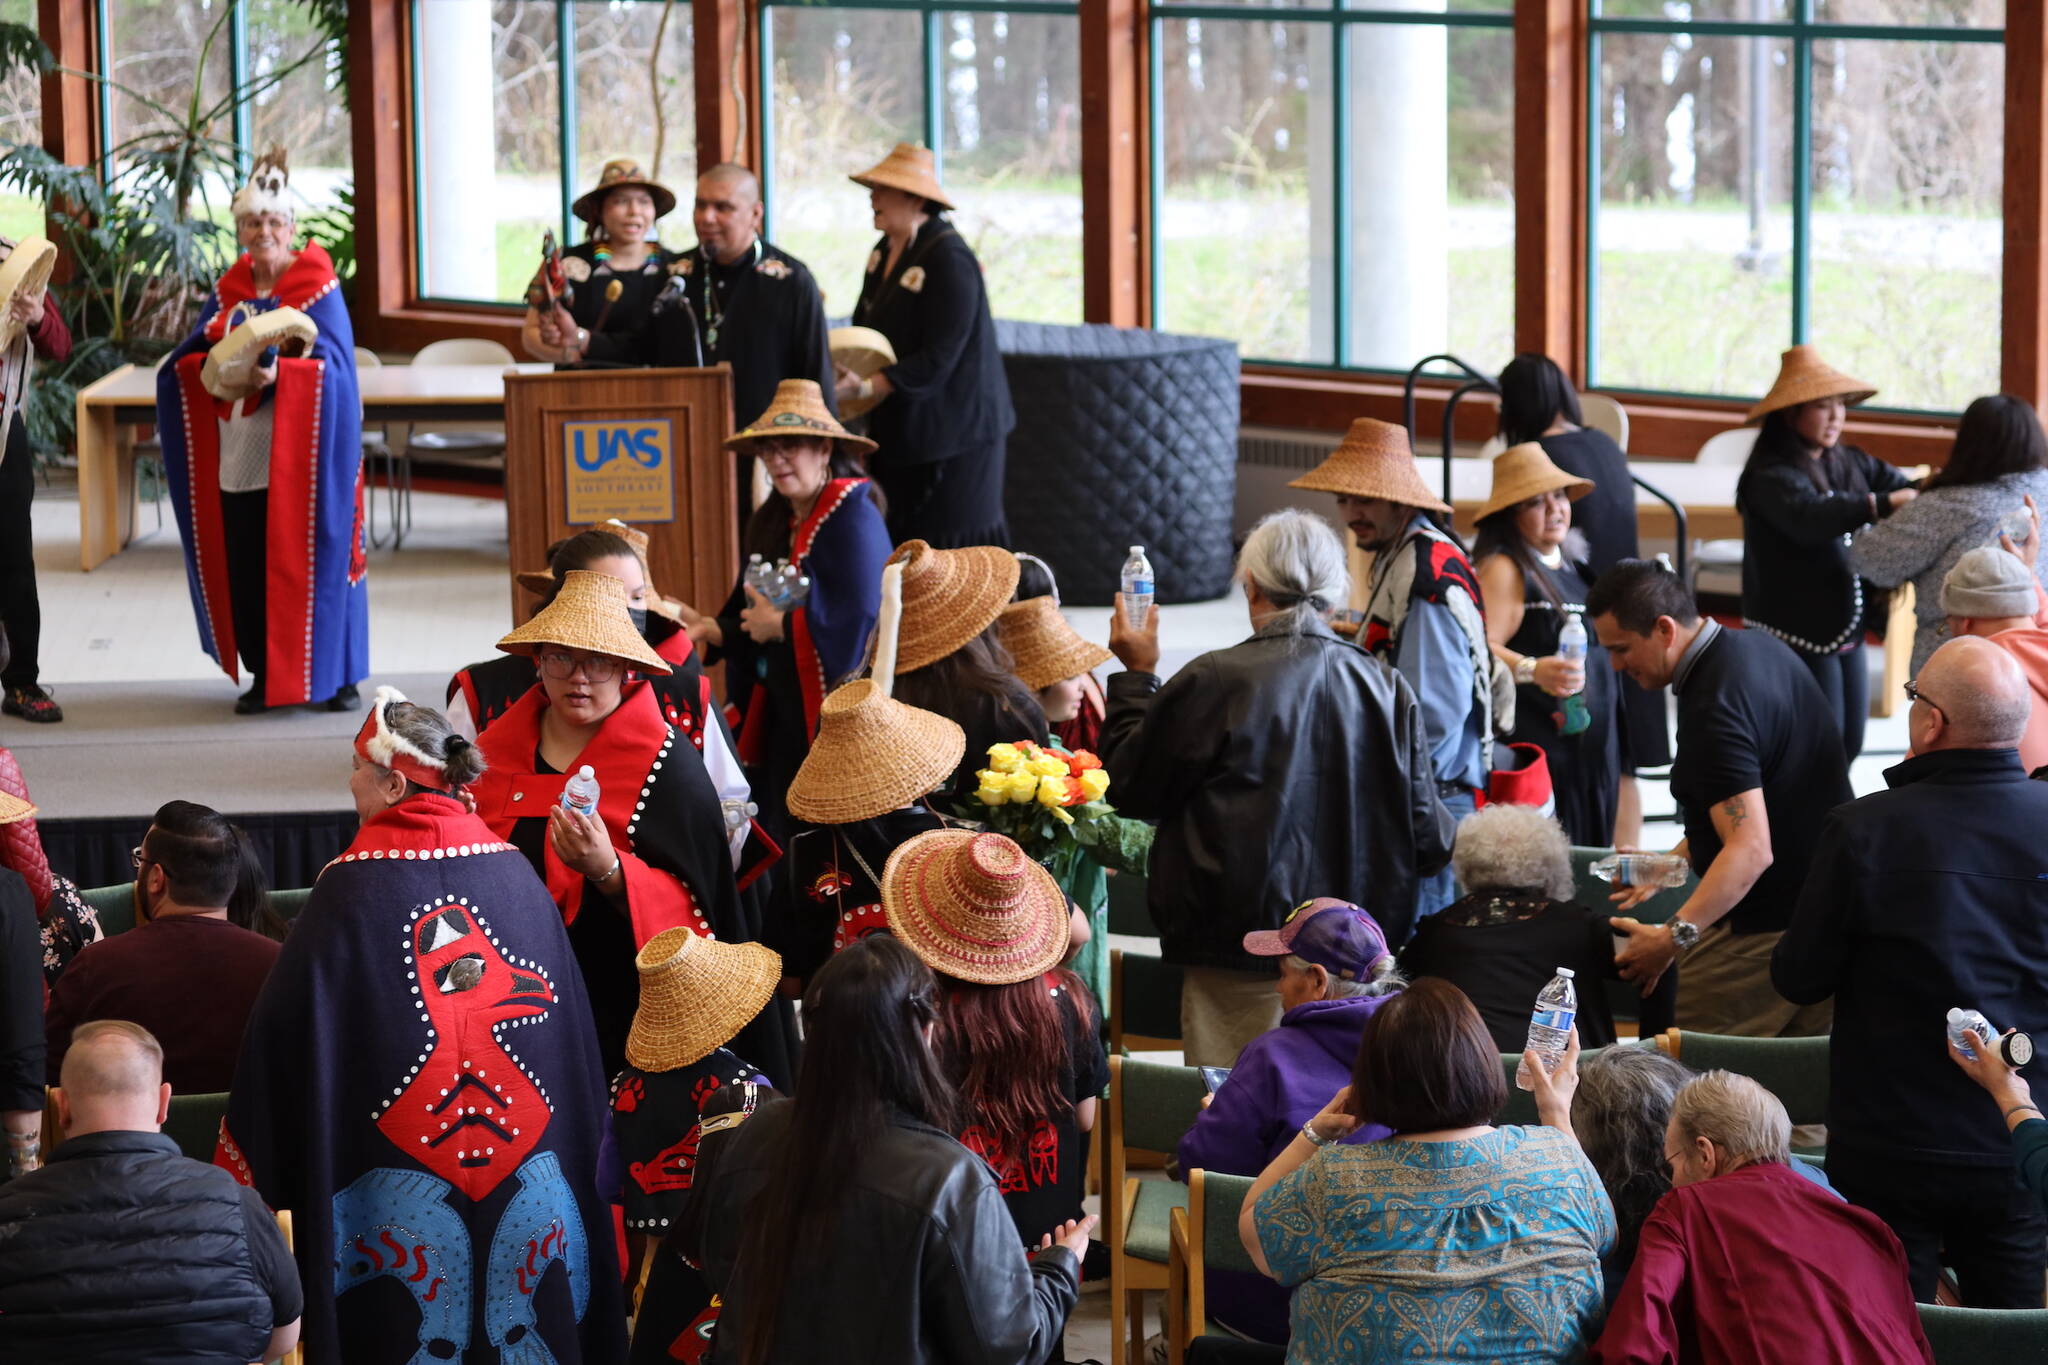 Faculty and dancers hand out gifts of water and body butter to graduates and family members during the Annual Native Graduation Celebration at the Egan Library Saturday morning before commencement. (Clarise Larson / Juneau Empire)